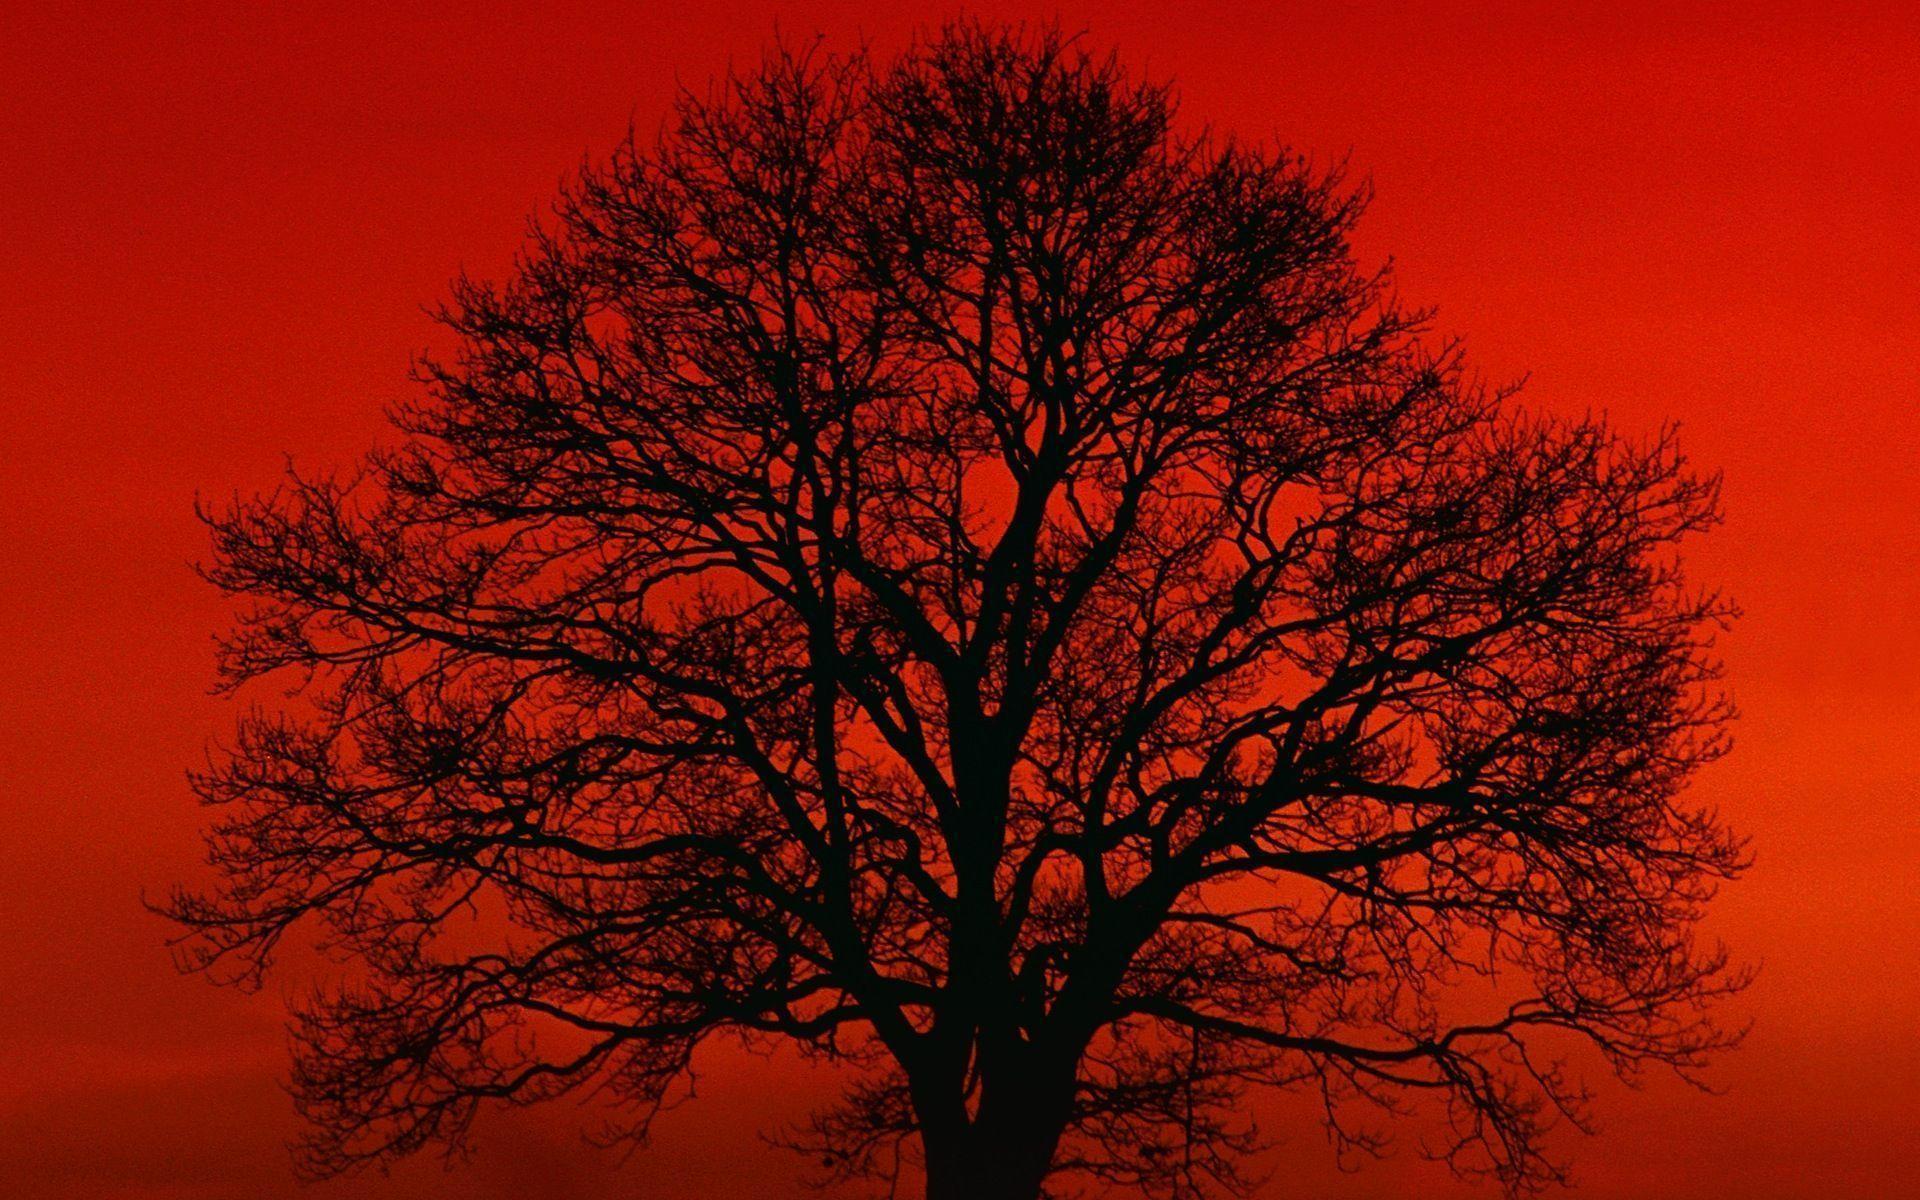 nature photo wallpaper,tree,sky,red,nature,red sky at morning